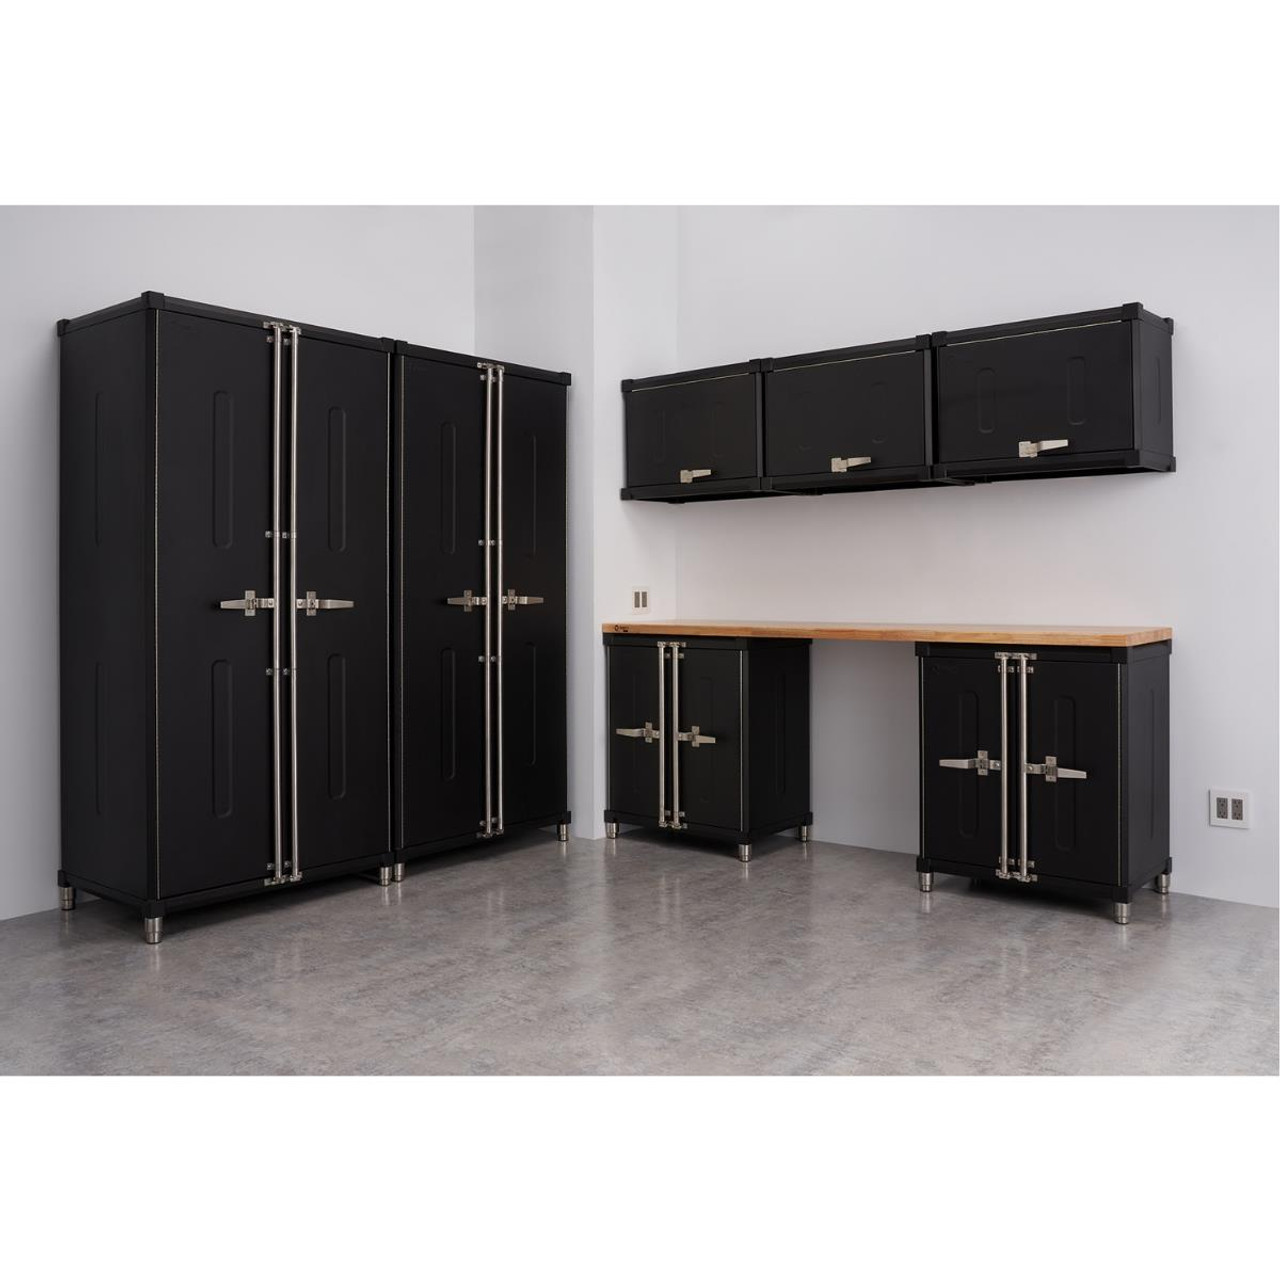 EXTRA HEAVY DUTY STORAGE CABINETS, Cabinet Type: C